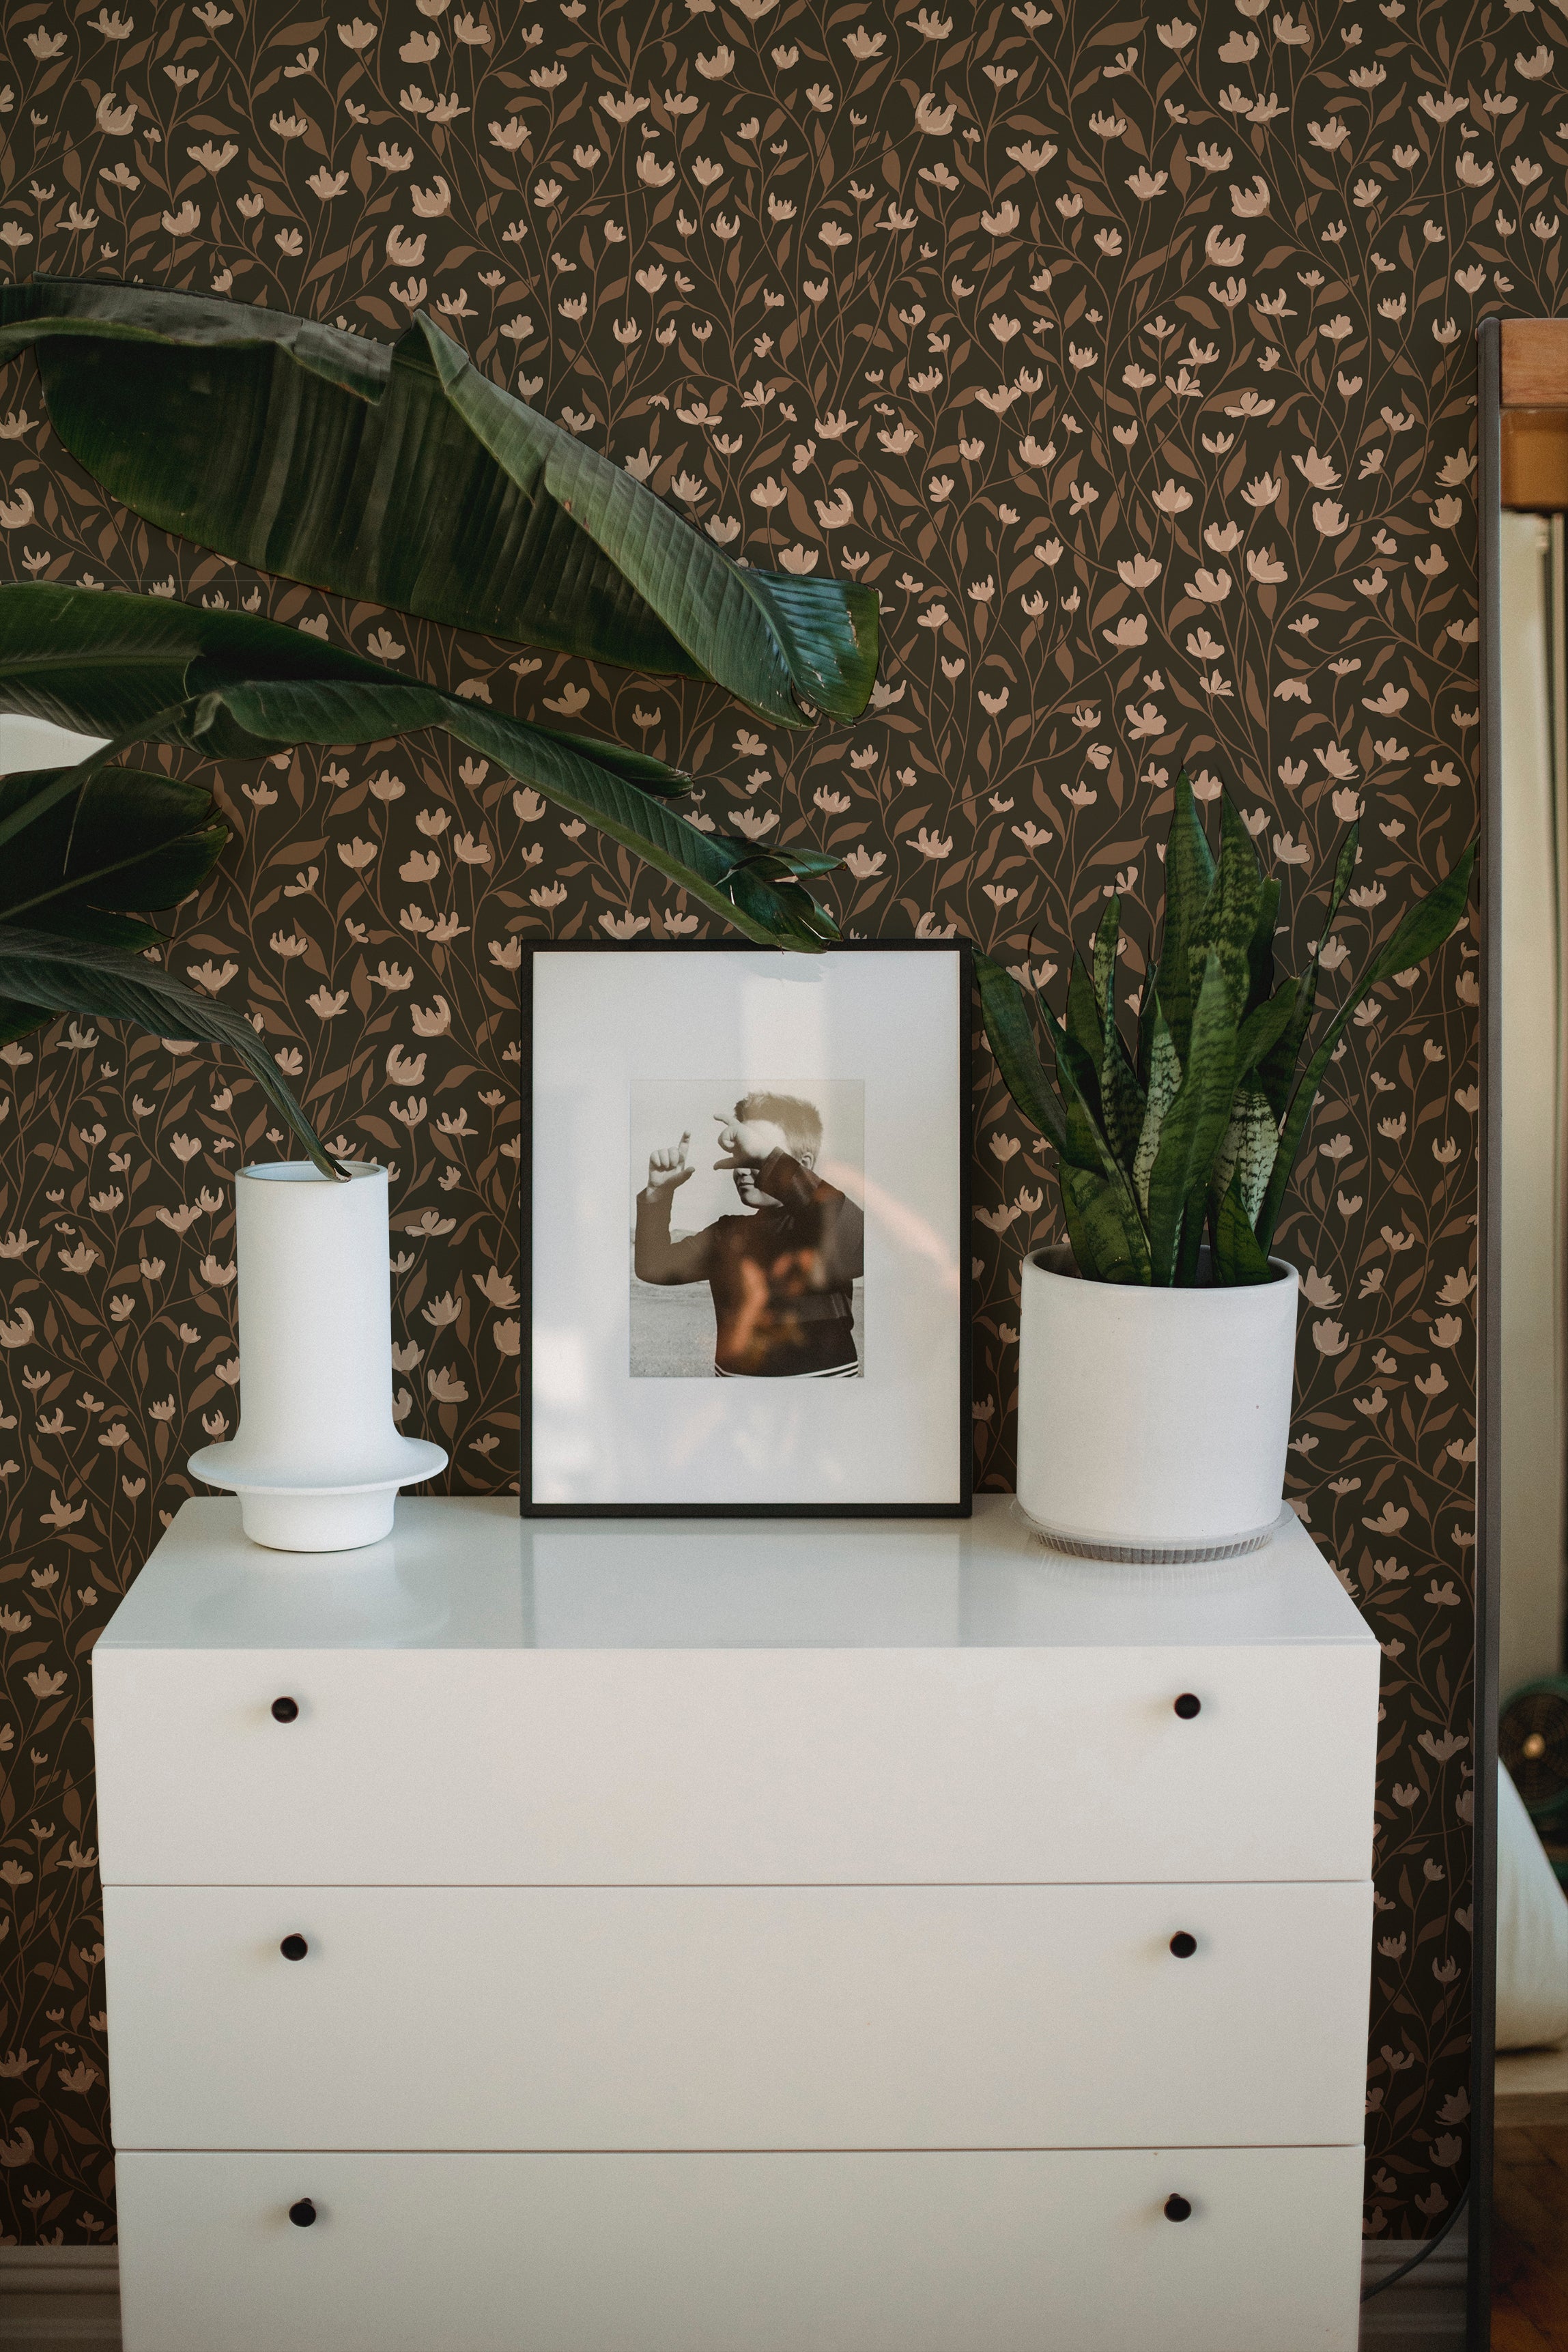 Elegant and modern interior with a white dresser set against a backdrop of sophisticated dark floral wallpaper, featuring small, delicate light pink flowers and brown leaves, complemented by green houseplants, a framed photograph, and a white candle.